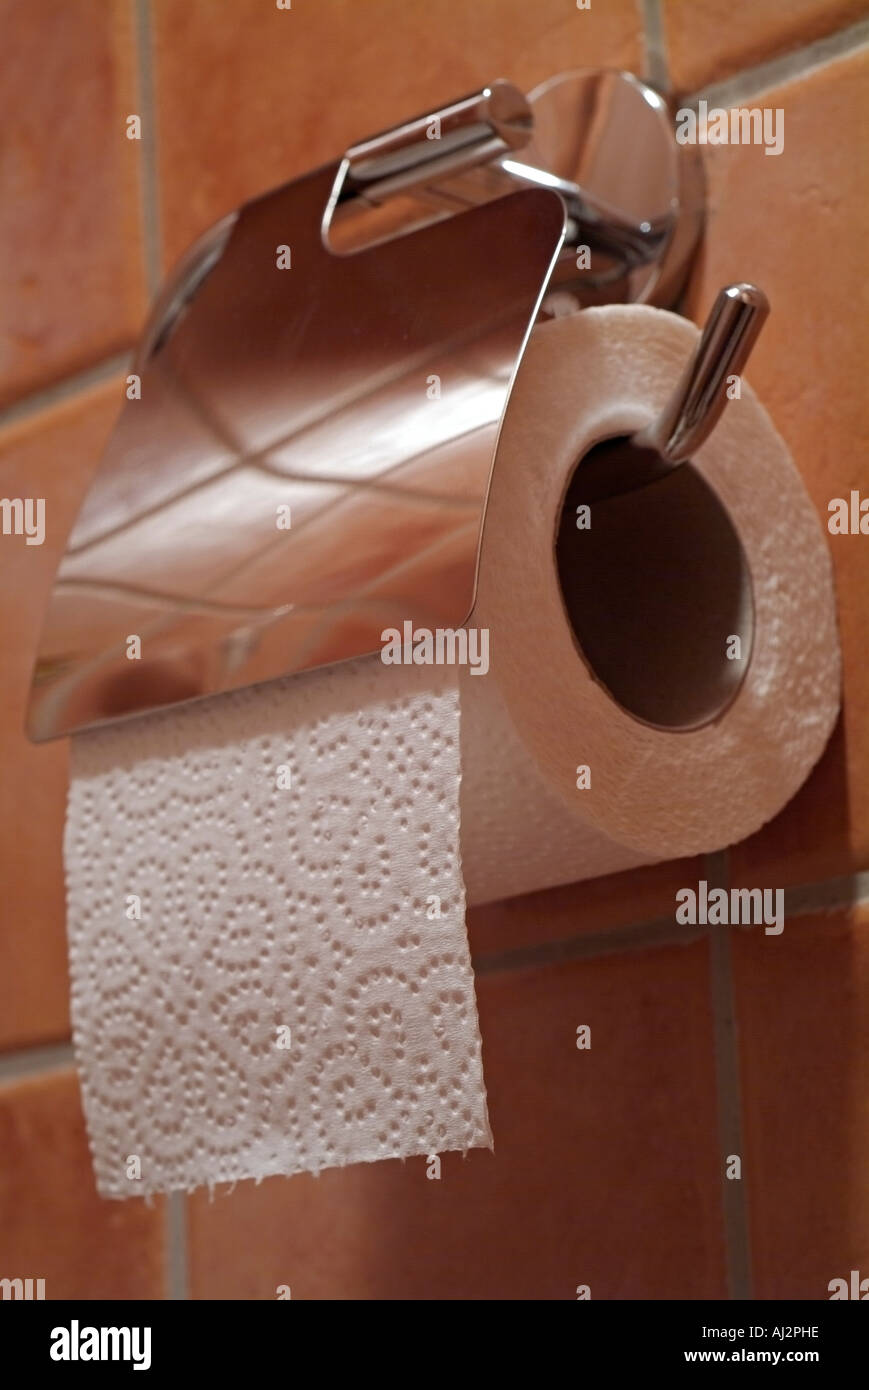 Toilet Roll Holder and lavatory Paper Stock Photo